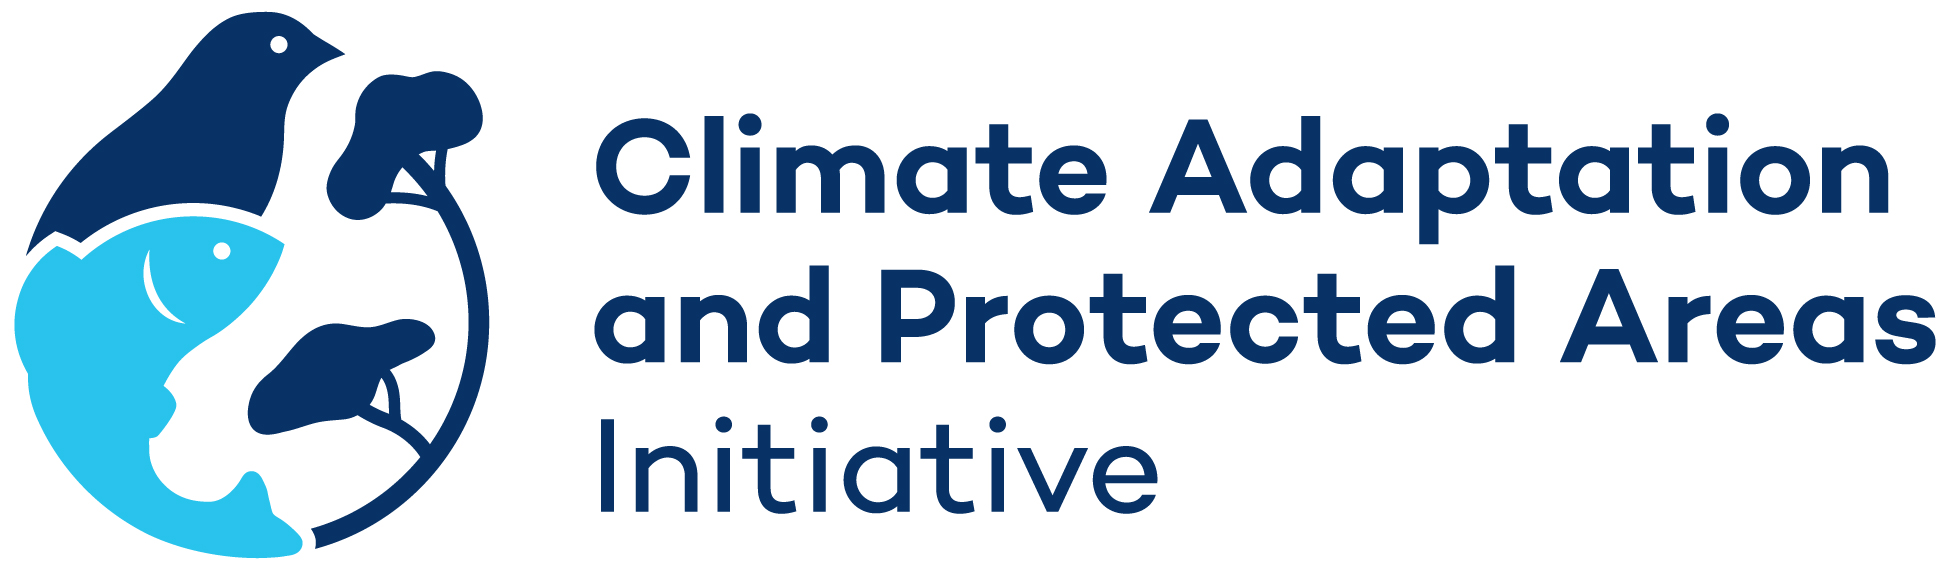 Climate Adaptation and Protected Areas (CAPA) Initiative logo